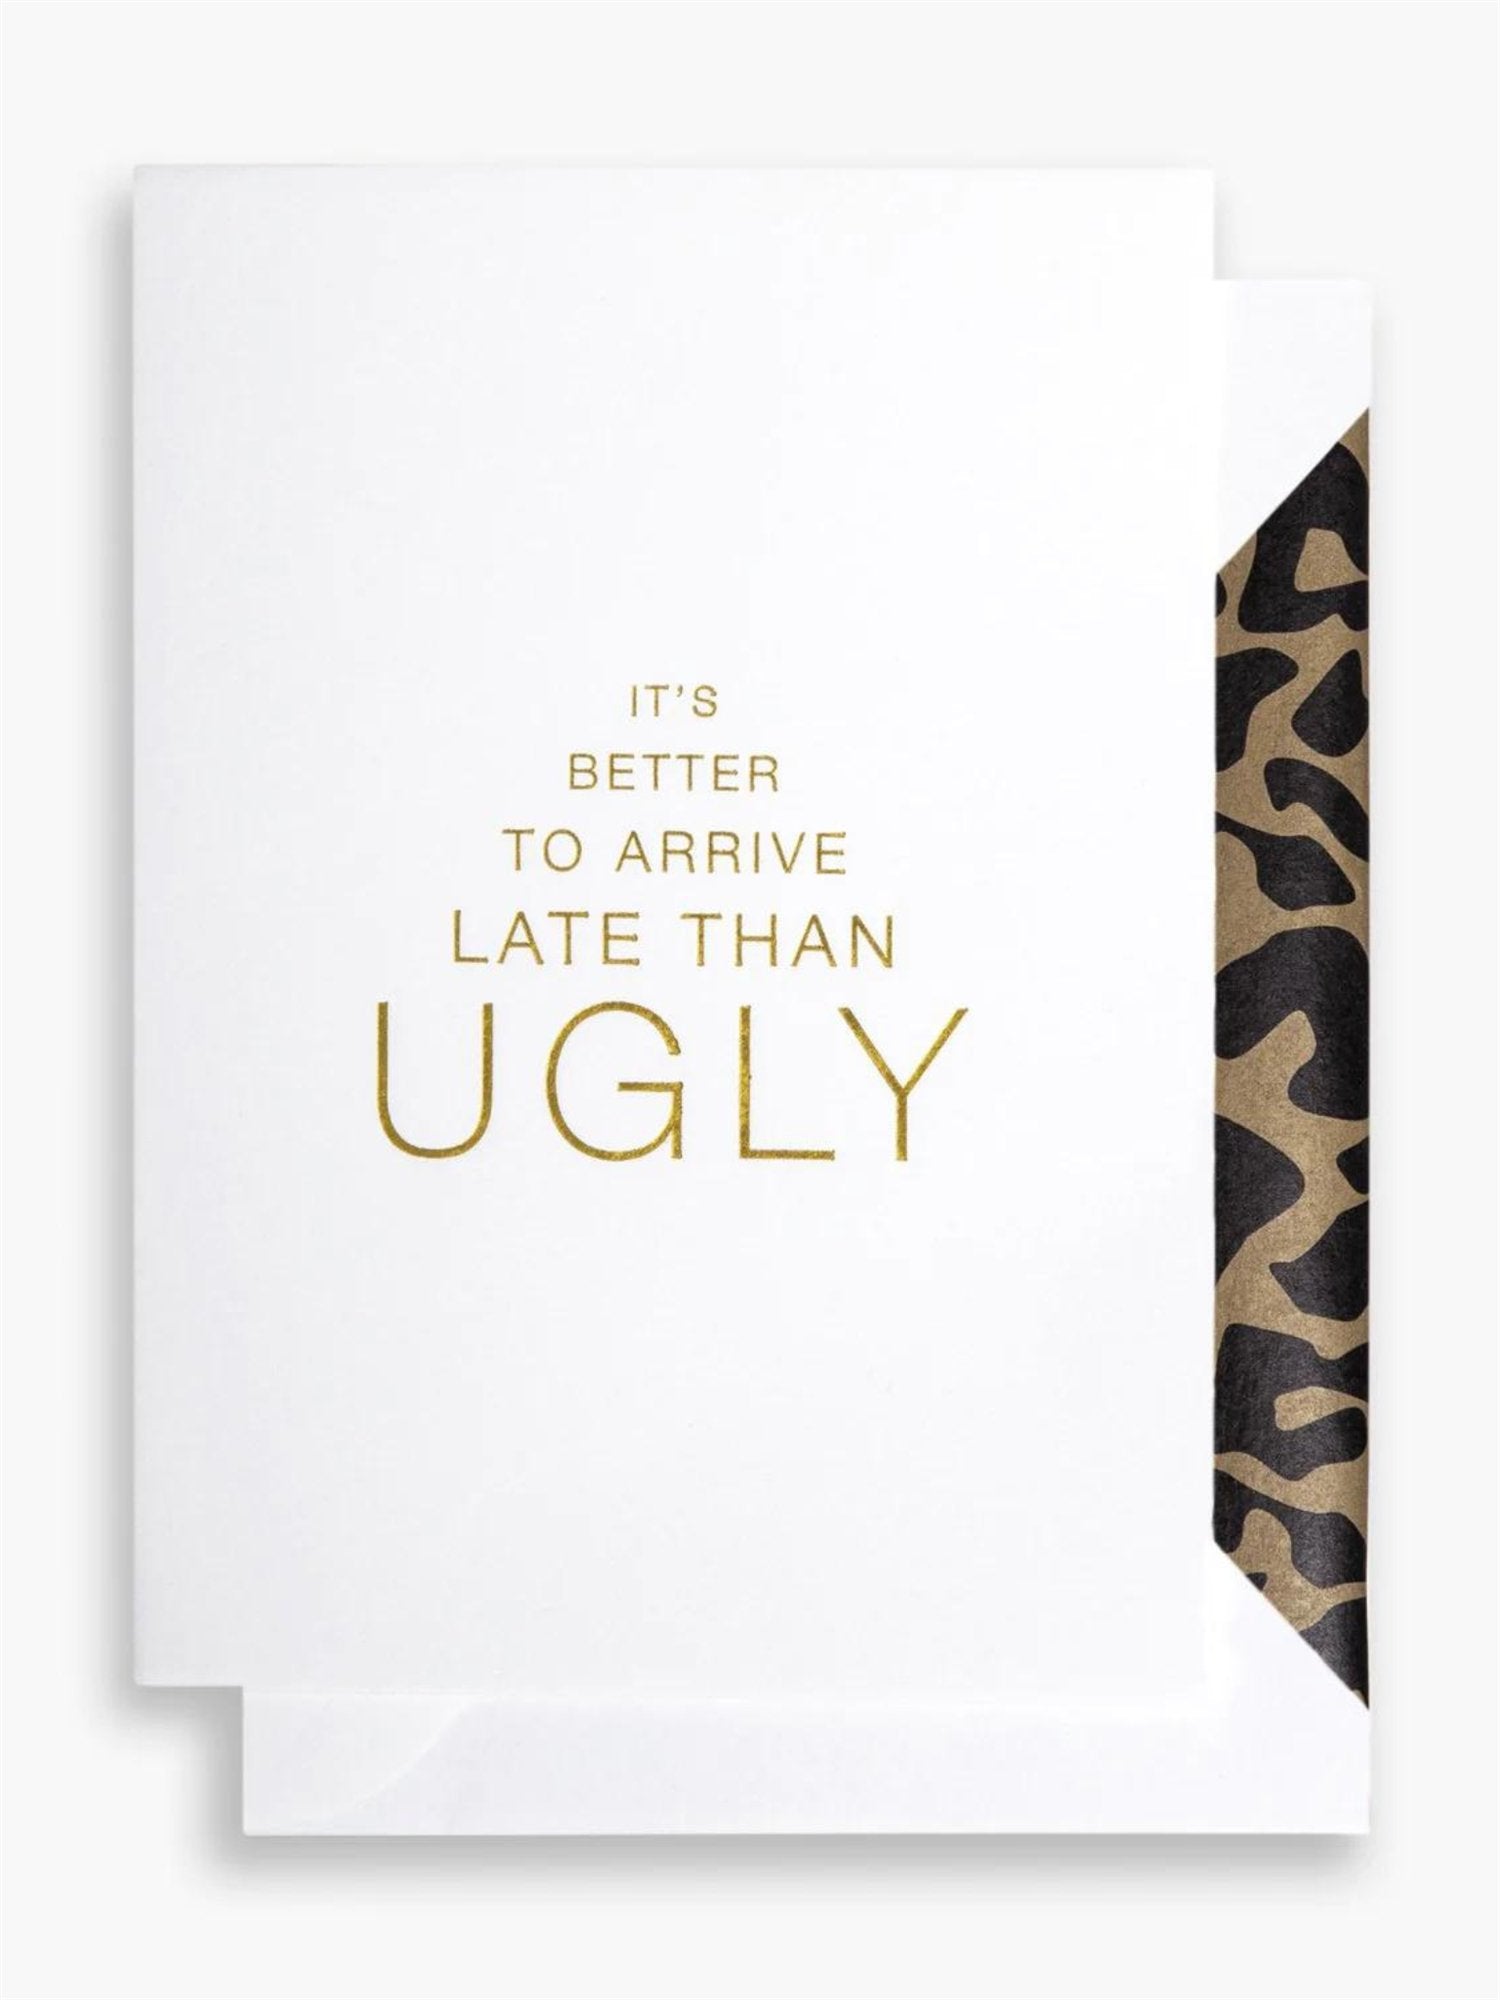 A6 Kort - "It's better to arrive late than ugly" - at home